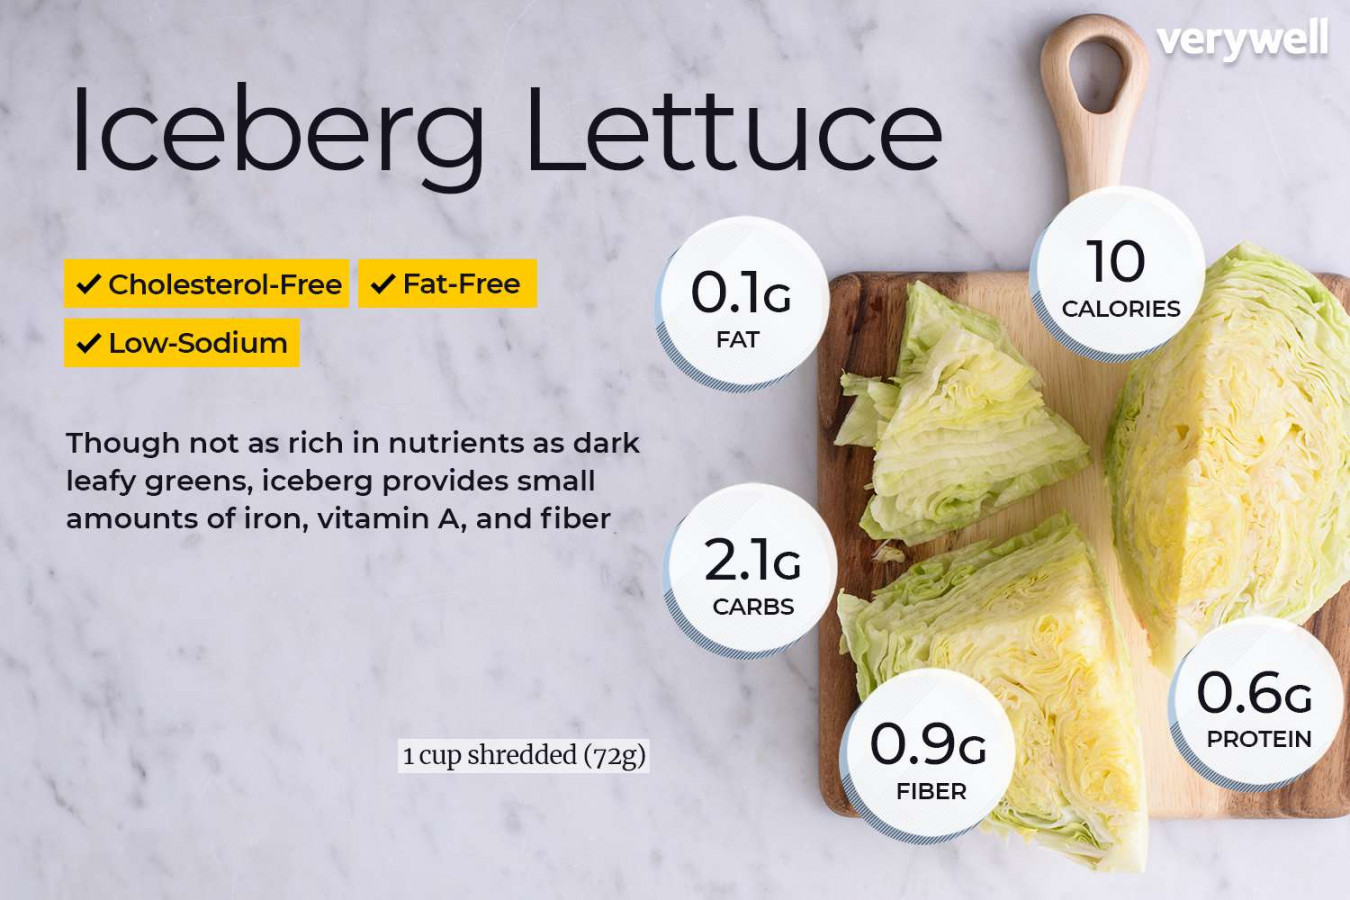 Iceberg Lettuce Nutrition Facts and Health Benefits